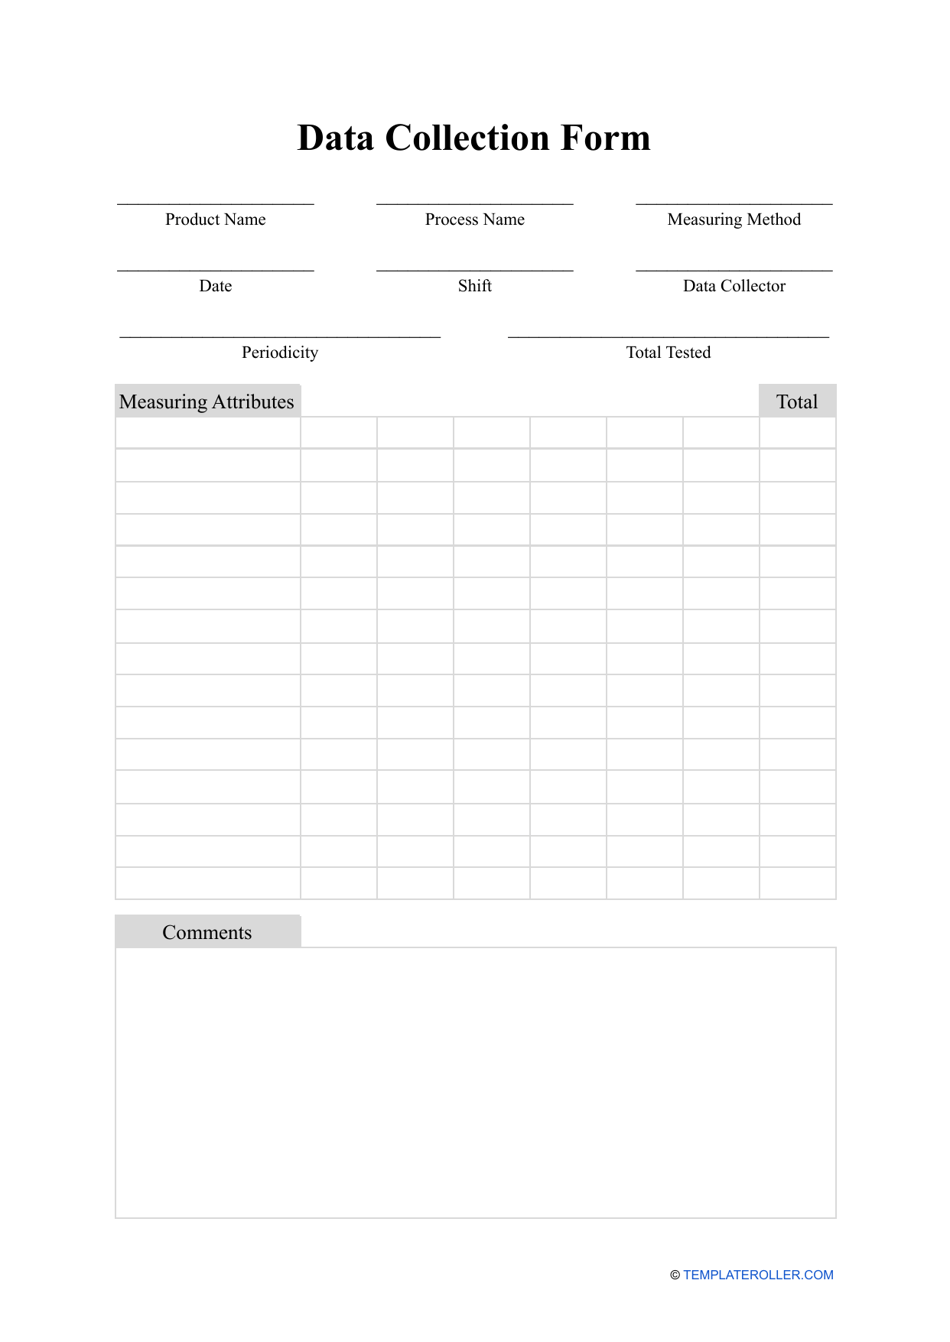 Data Collection Form, Page 1